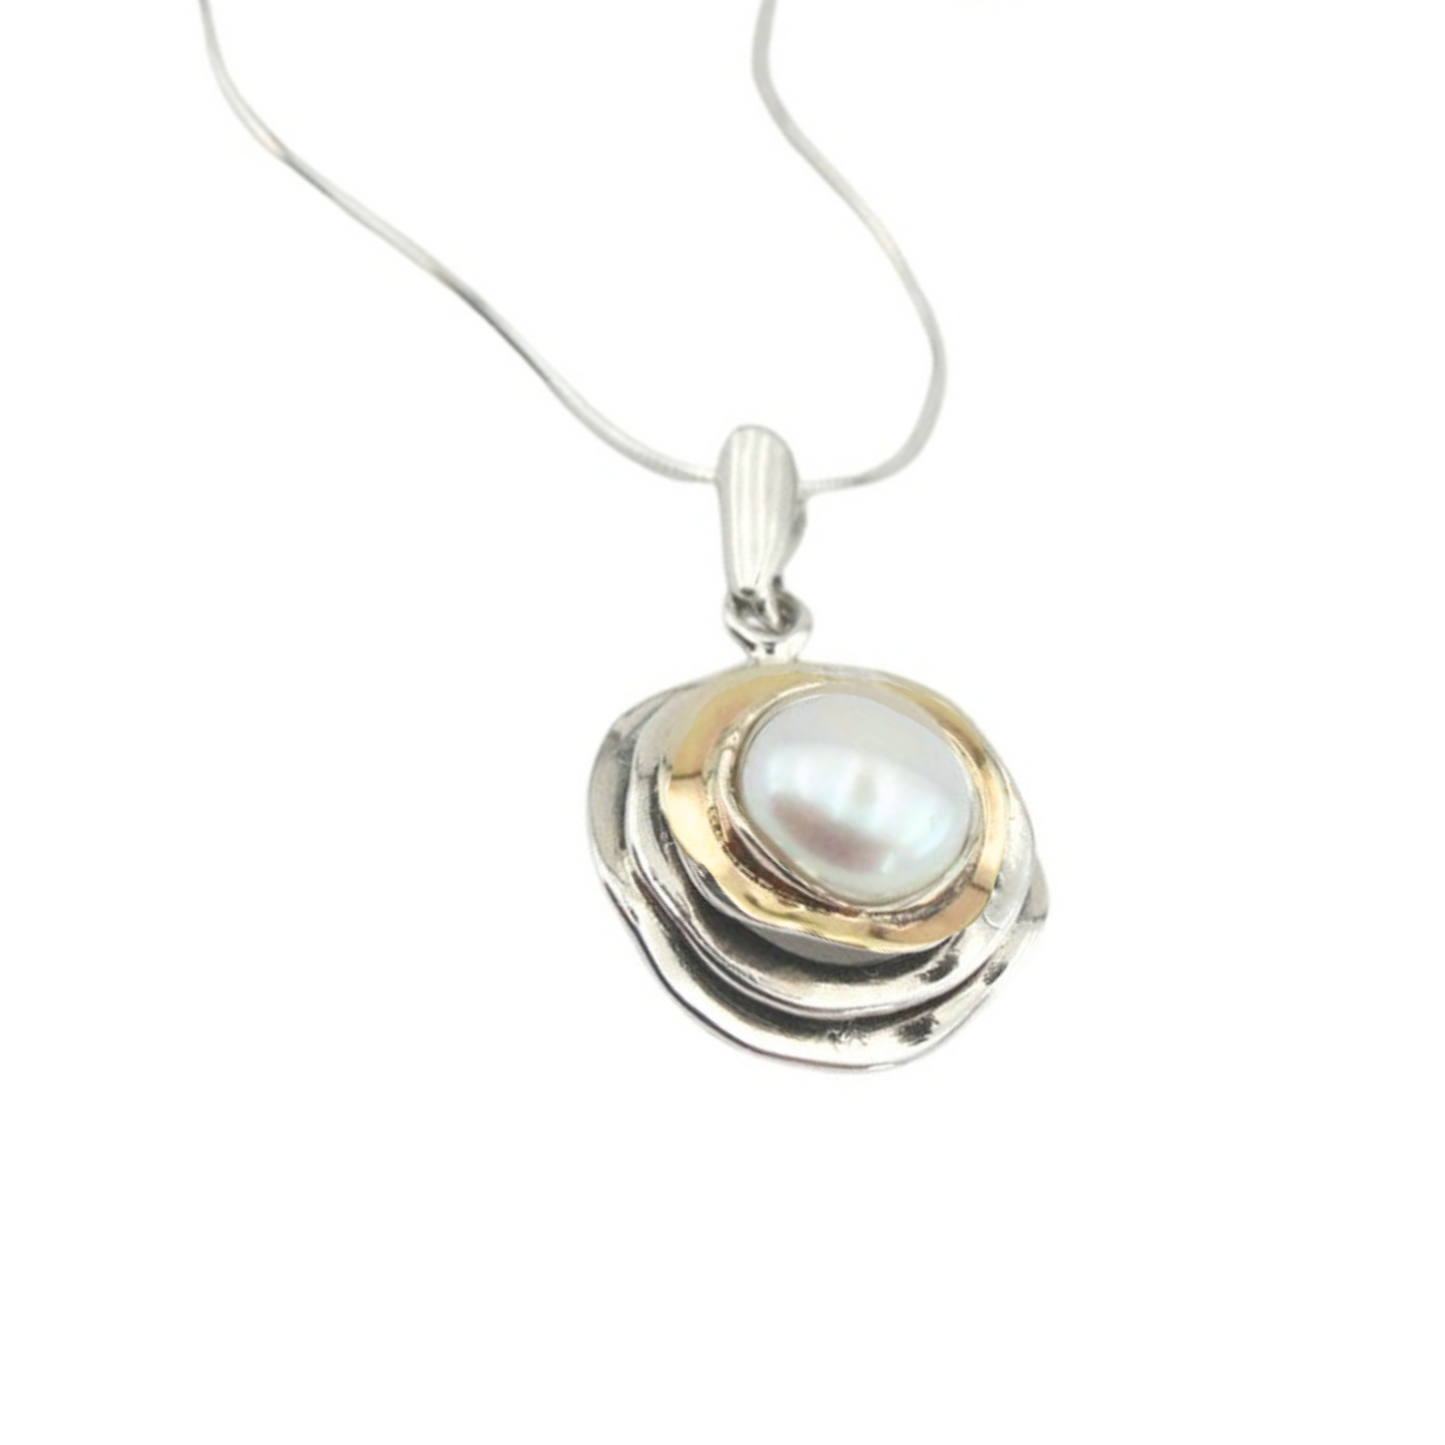 Pearl pendant, Round pearl pendant, Silver and gold Pendant, Pearl necklace, Israeli jewelry, Israeli design, gift for her, Pearl necklace